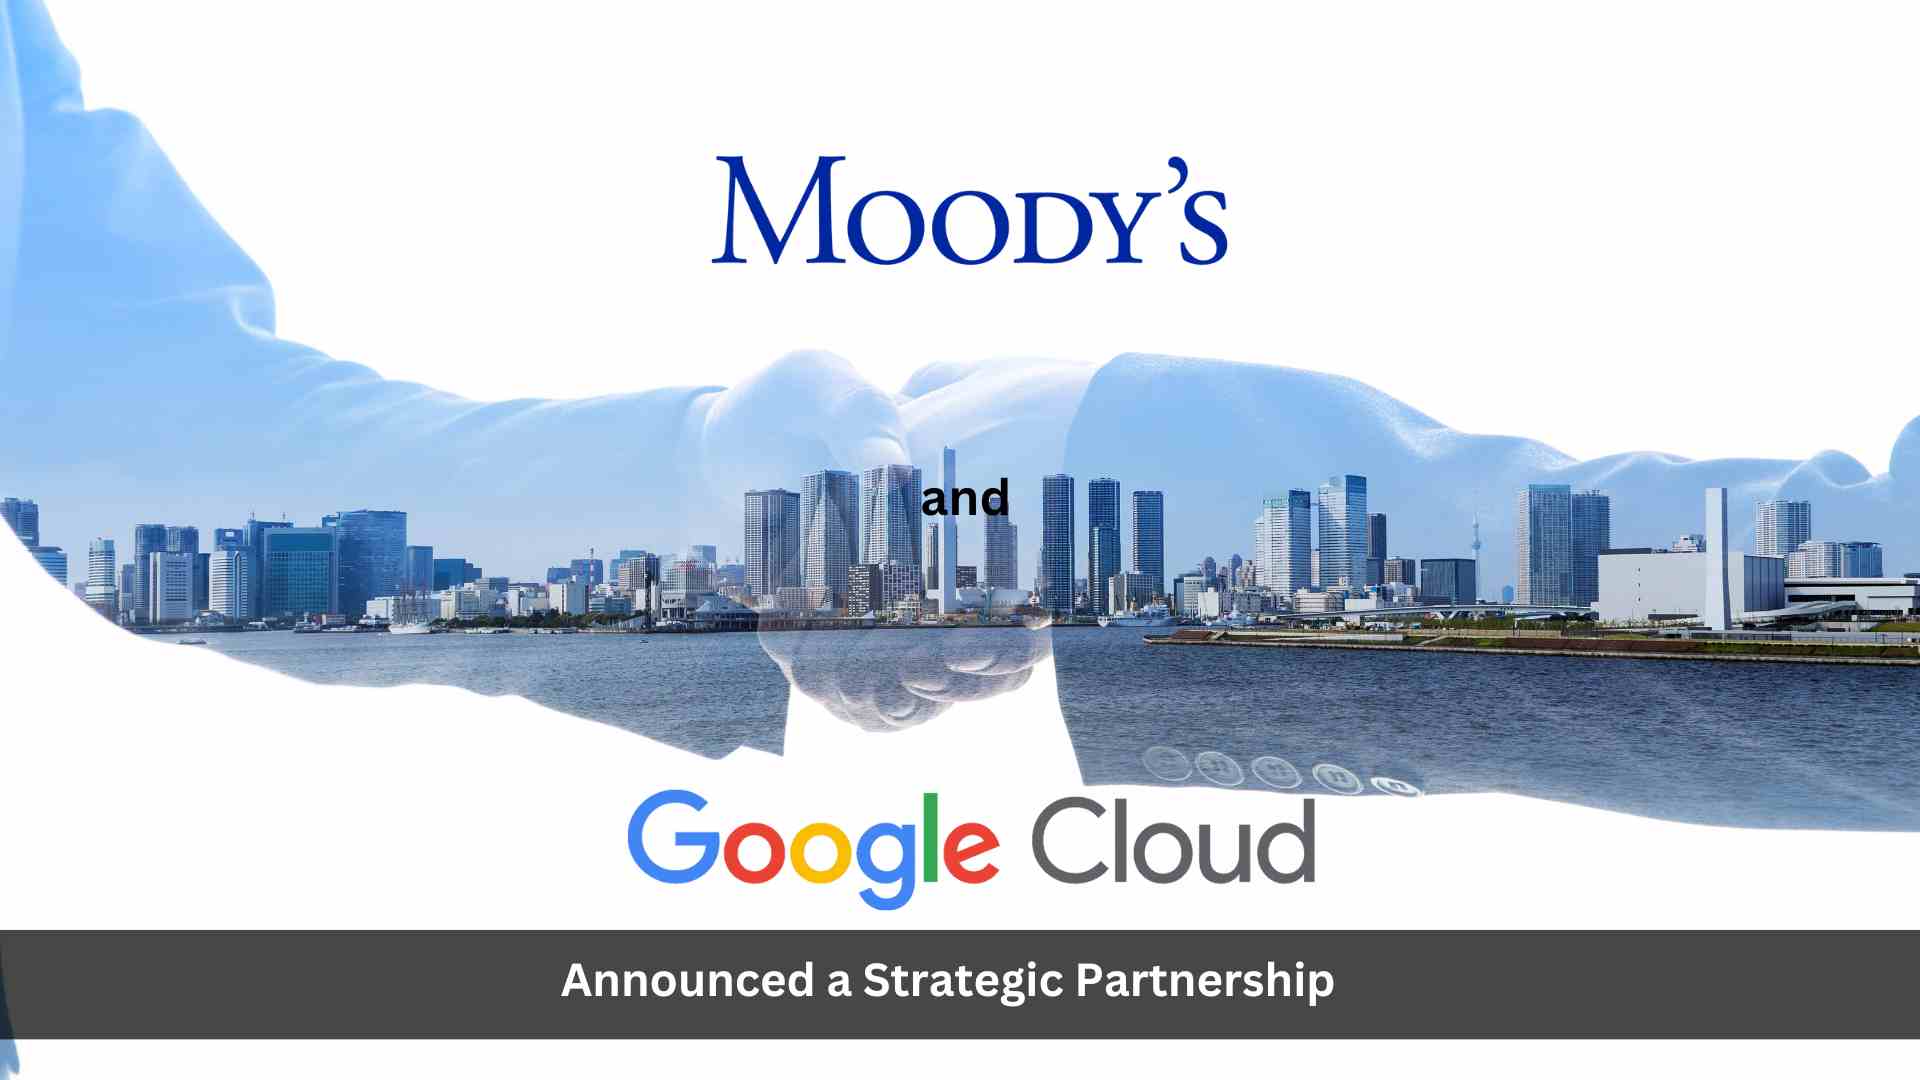 Moody's and Google Cloud Partner on Generative AI Applications Tailored for Financial Services Professionals